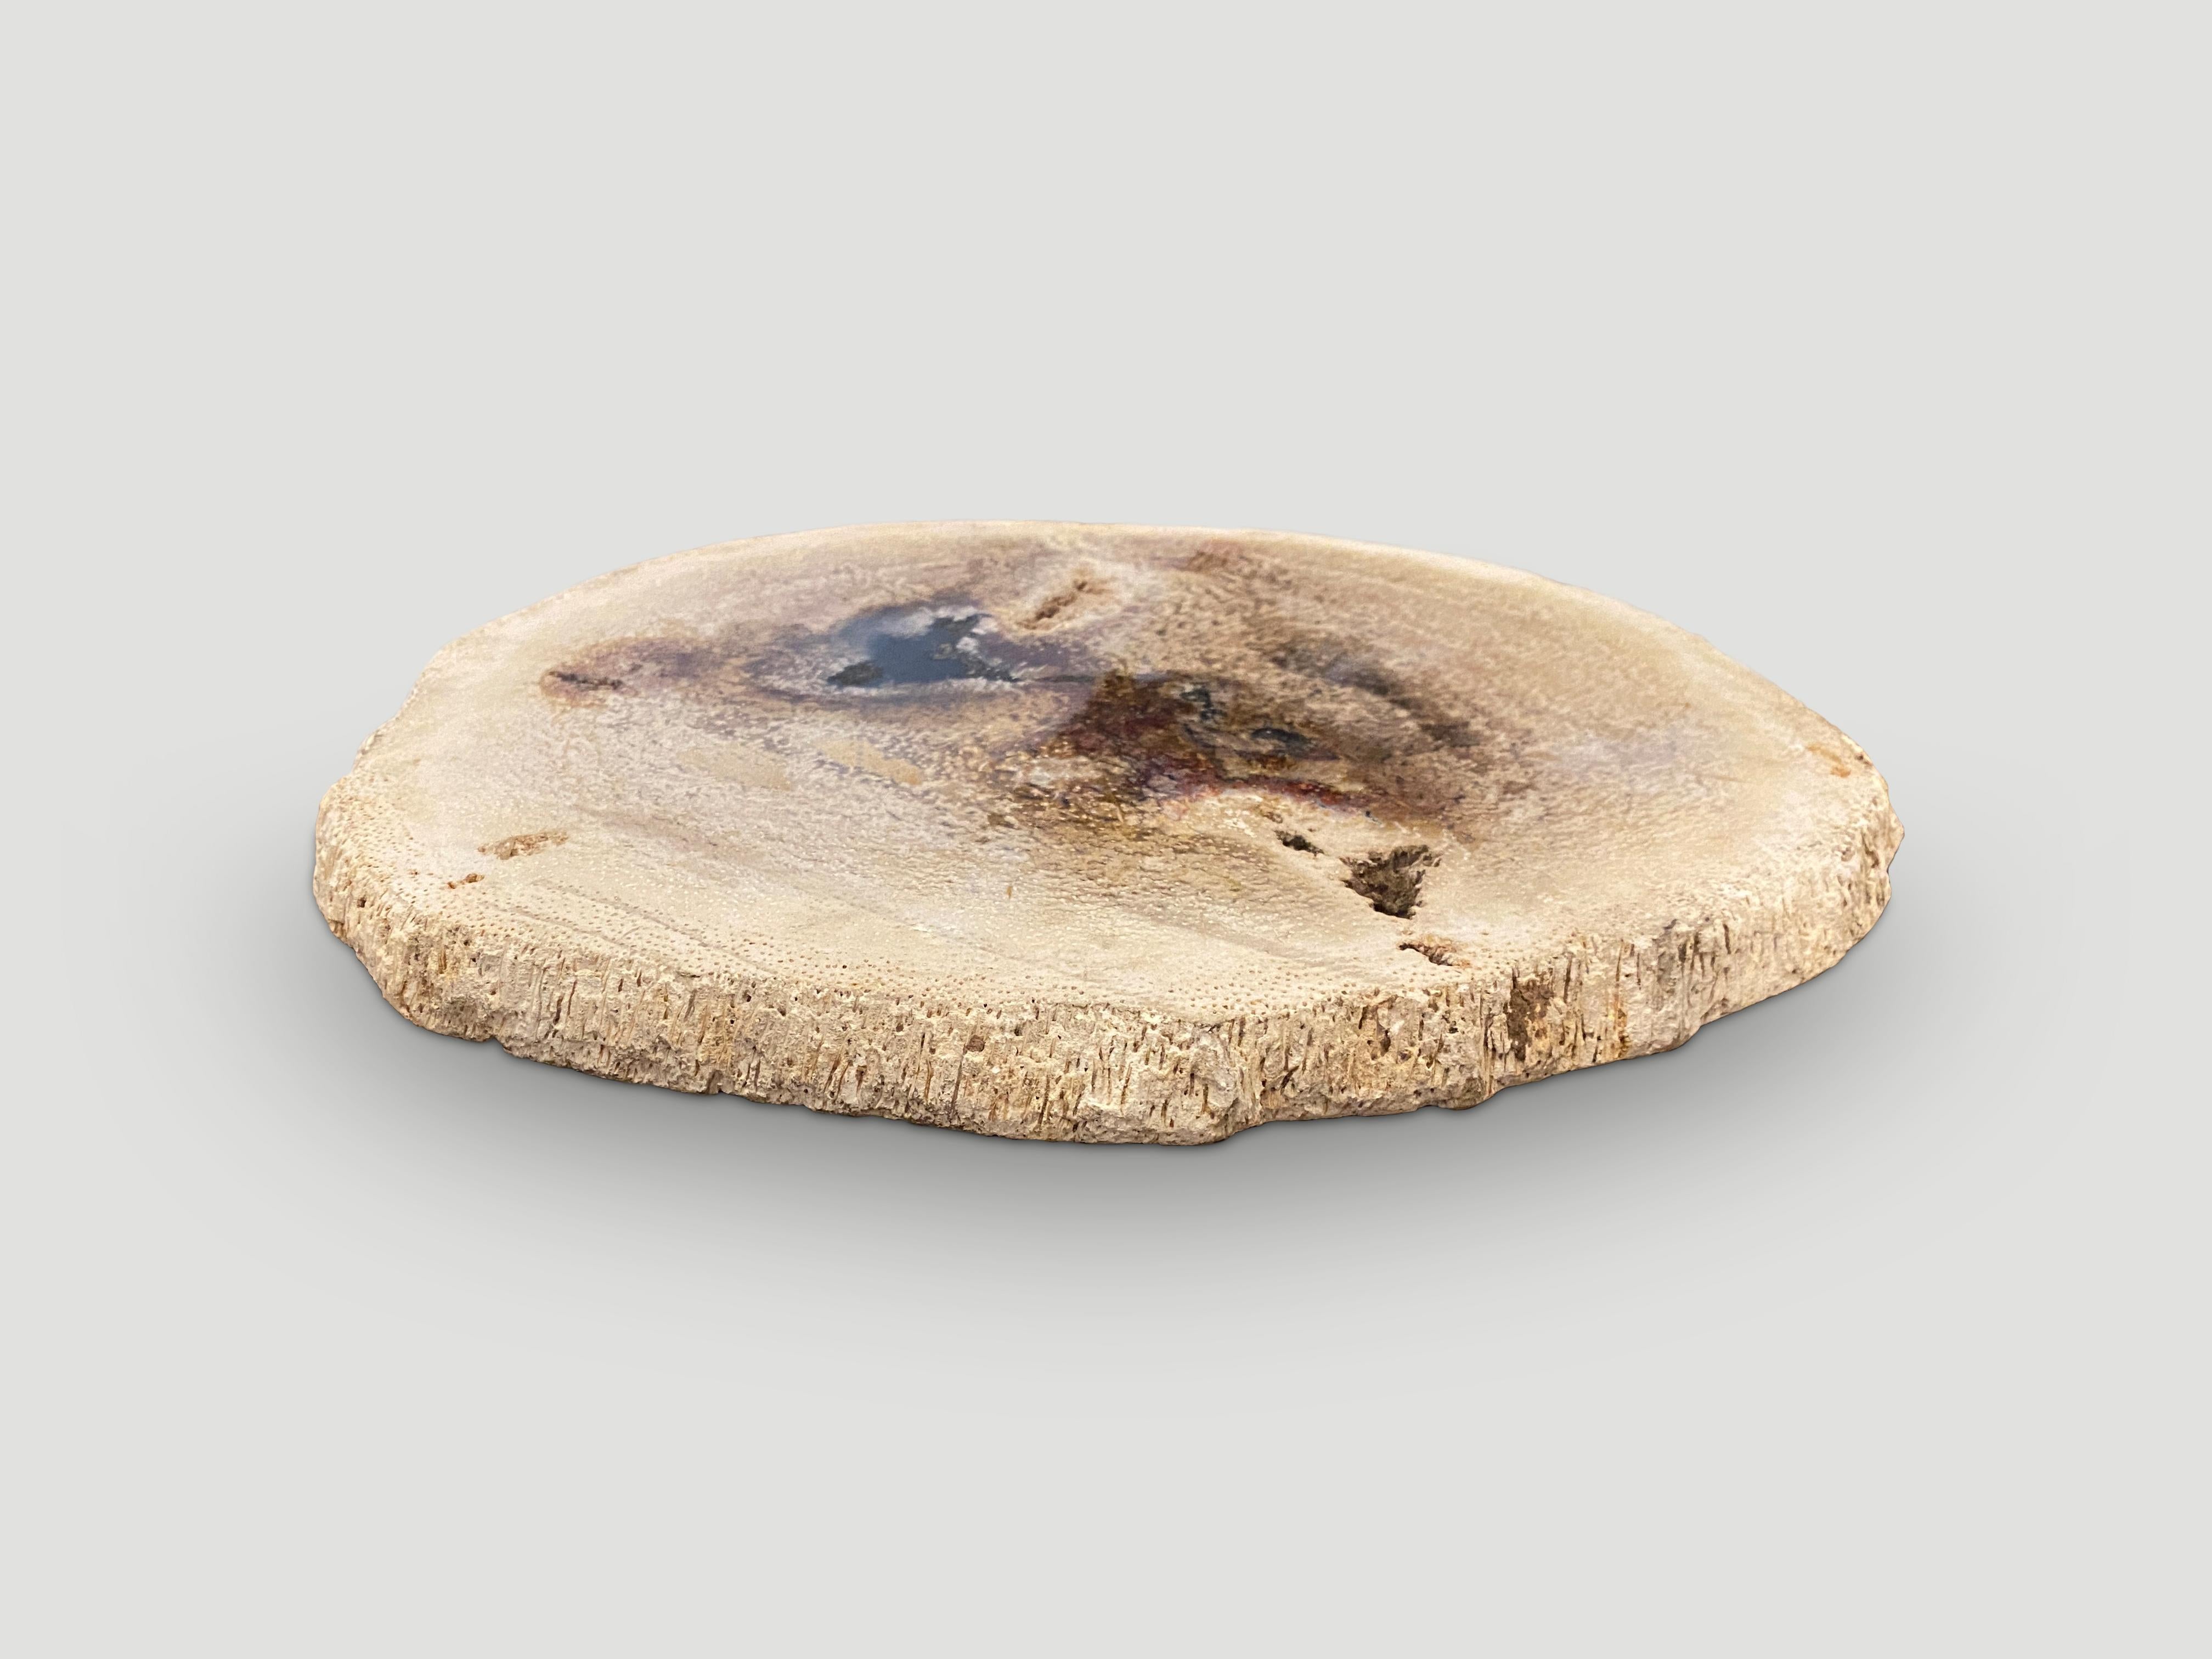 Beautiful contrasting colors on this stunning palm petrified wood slab. Polished on both sides. Perfect as a place holder for jewelry, a large coaster to elevate a regular side table or for a cheese platter to name a few options. We have a